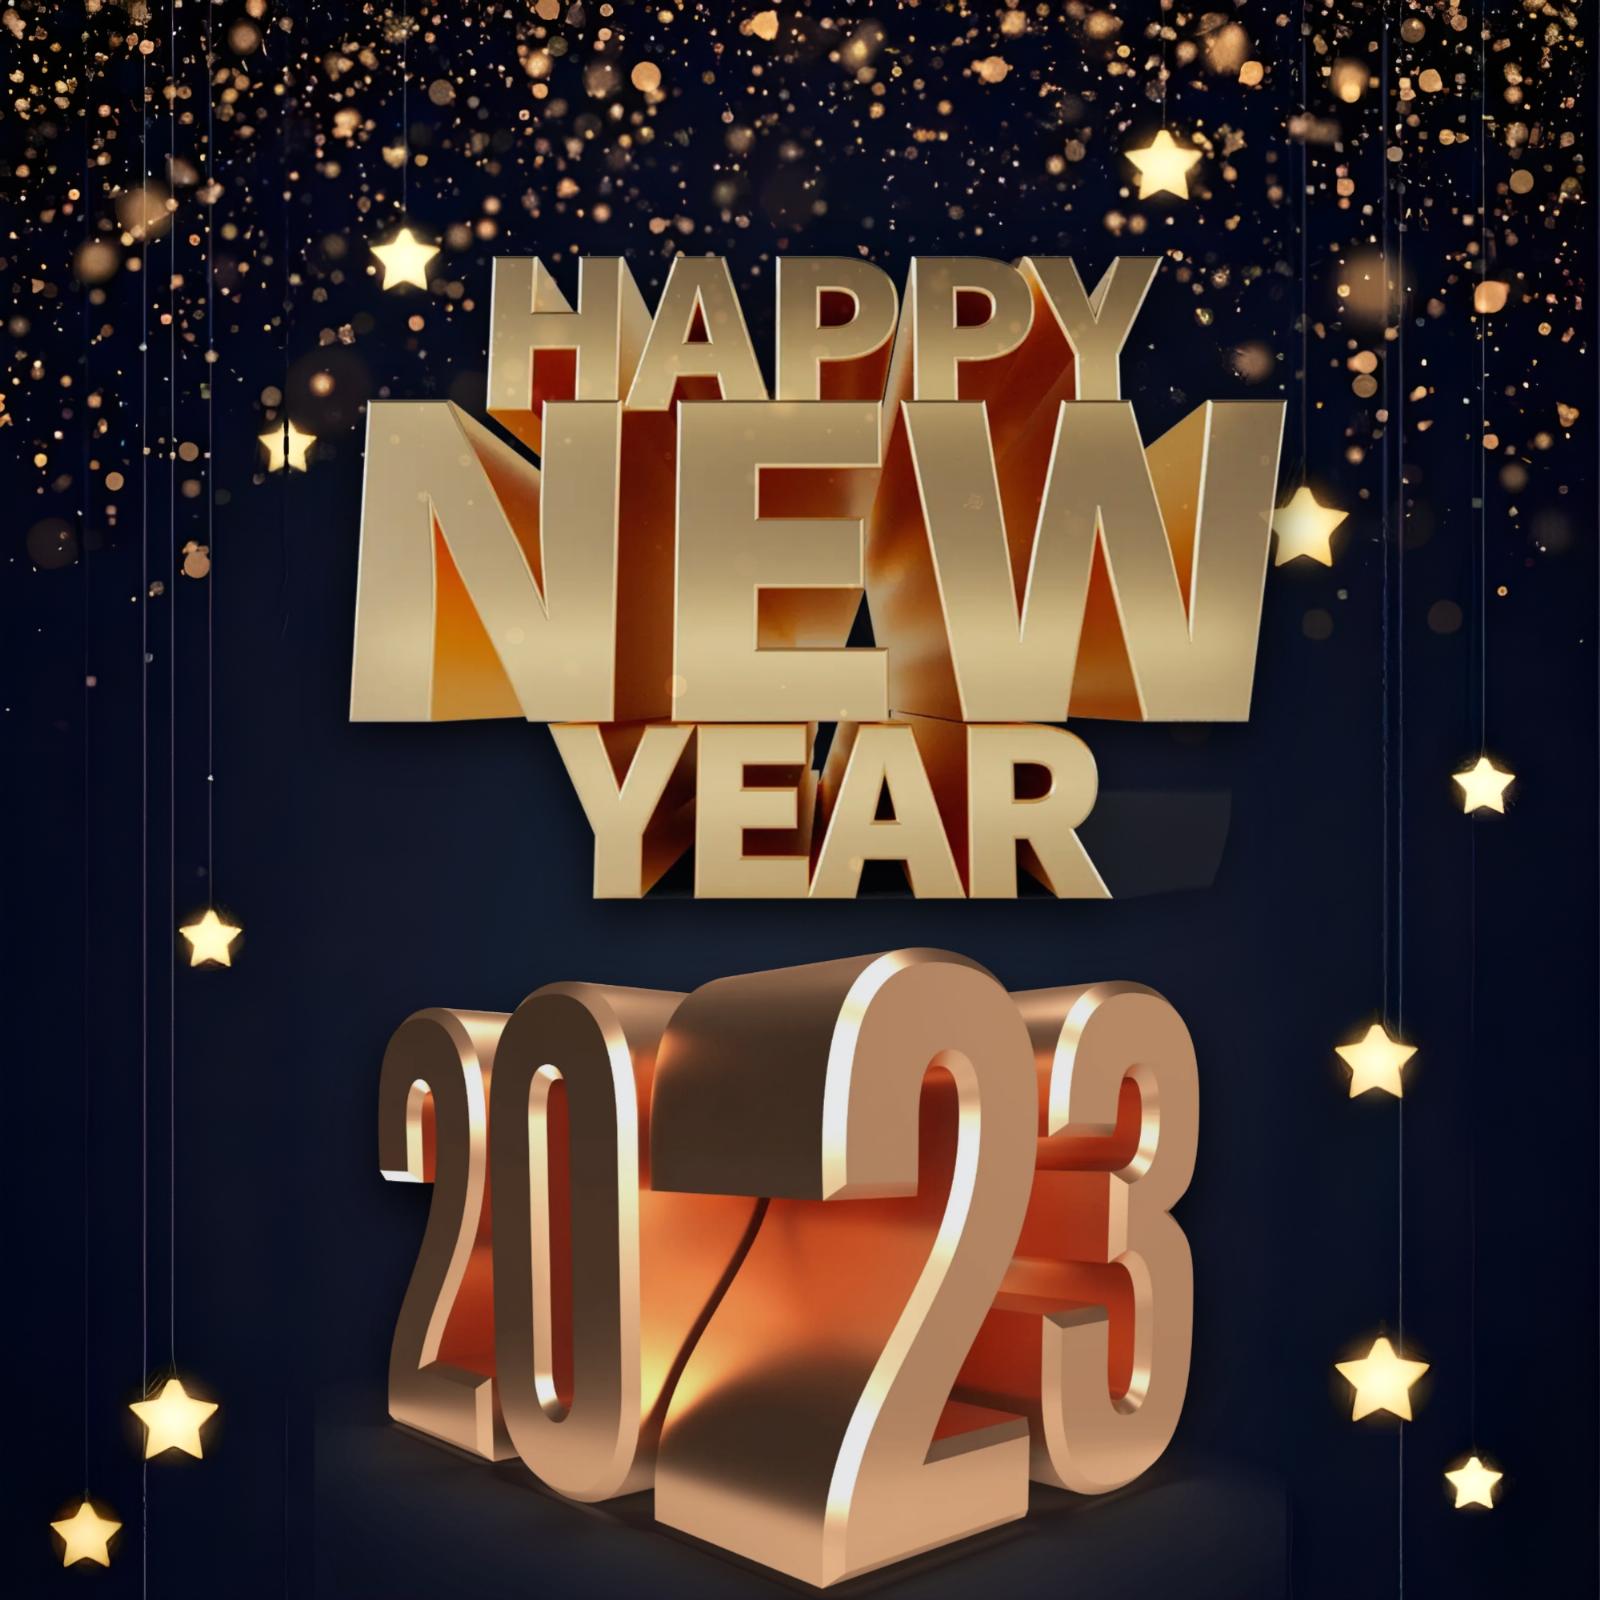 Happy New Year 2023 Images Free Download